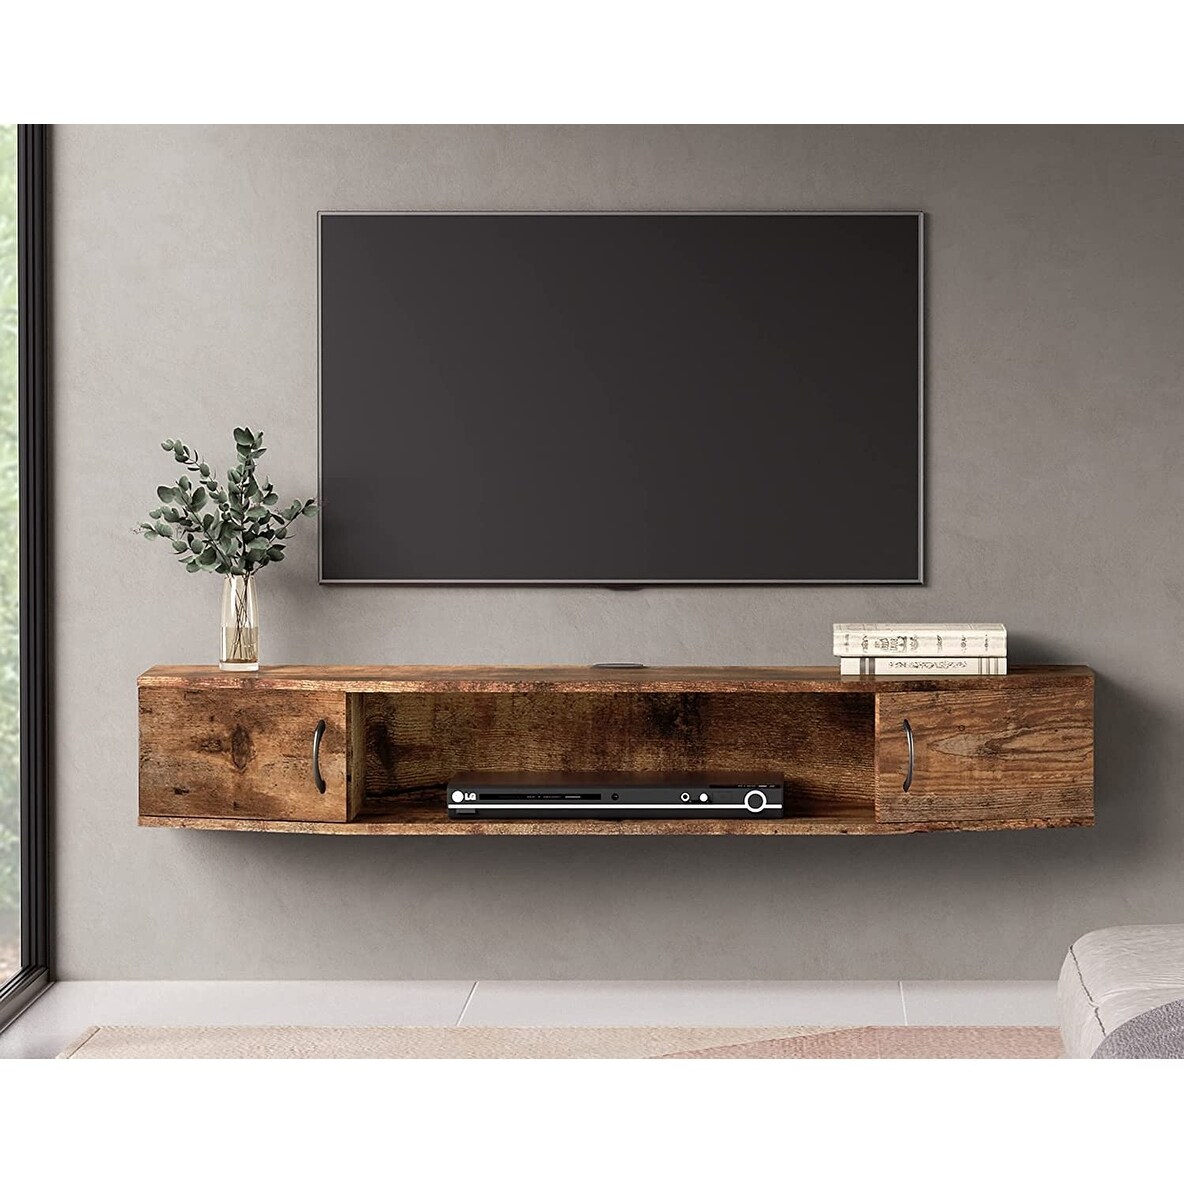 Floating TV Stand Wall Mounted Shelf,Wood Media Console Entertainment Center Under TV, Cabinet Hutch Desk Storage for Living Room,Rustic Brown